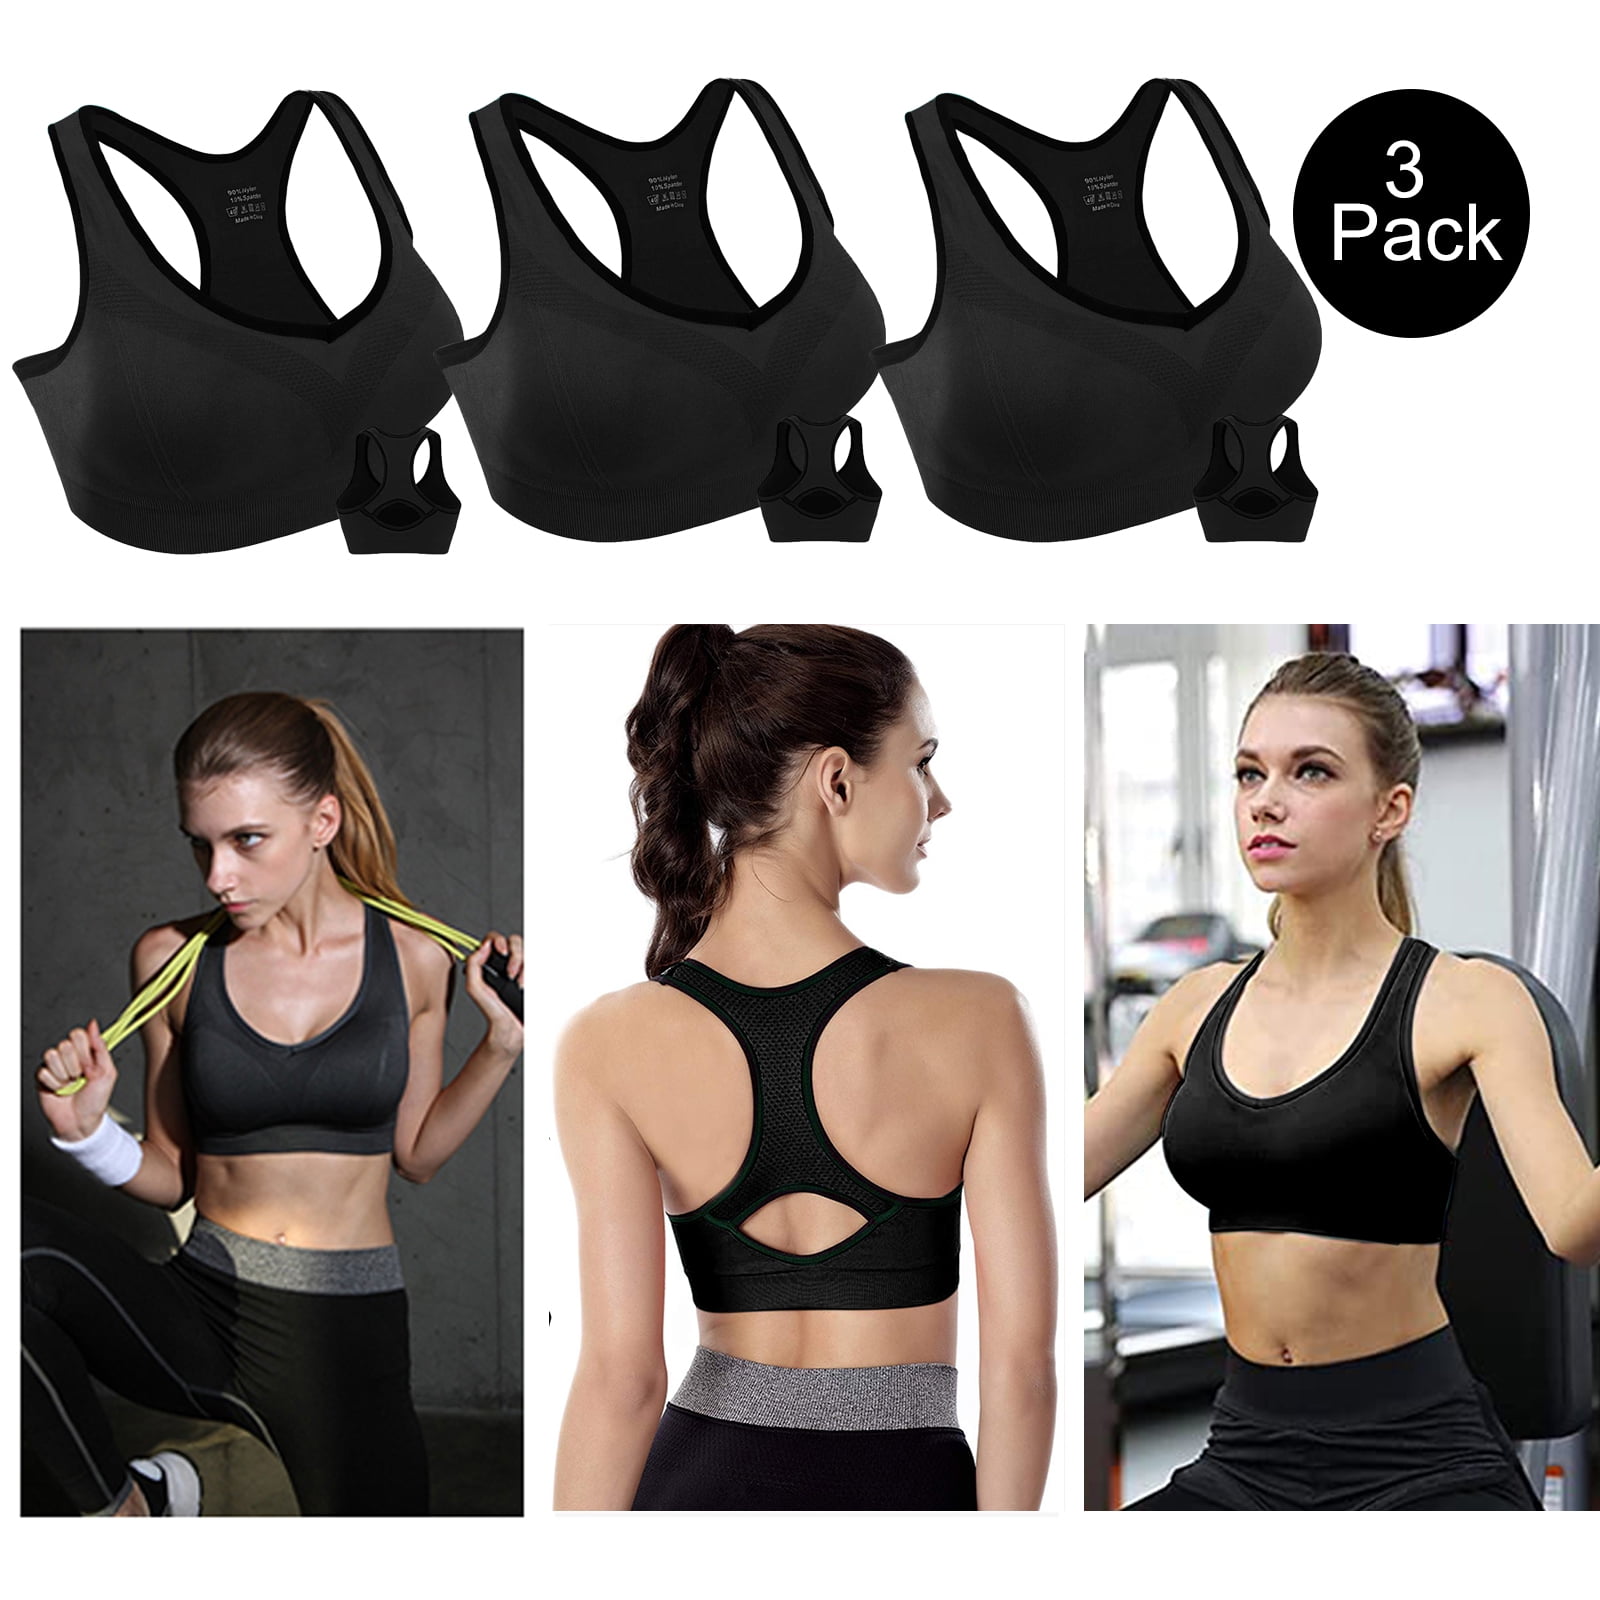 Workout Sports Bra with 3 Pack for Women, XXL Sized Padded Seamless High  Impact Racerback Bras Suitable for Indoor Outdoor Yoga Gym Fitness (Black)  